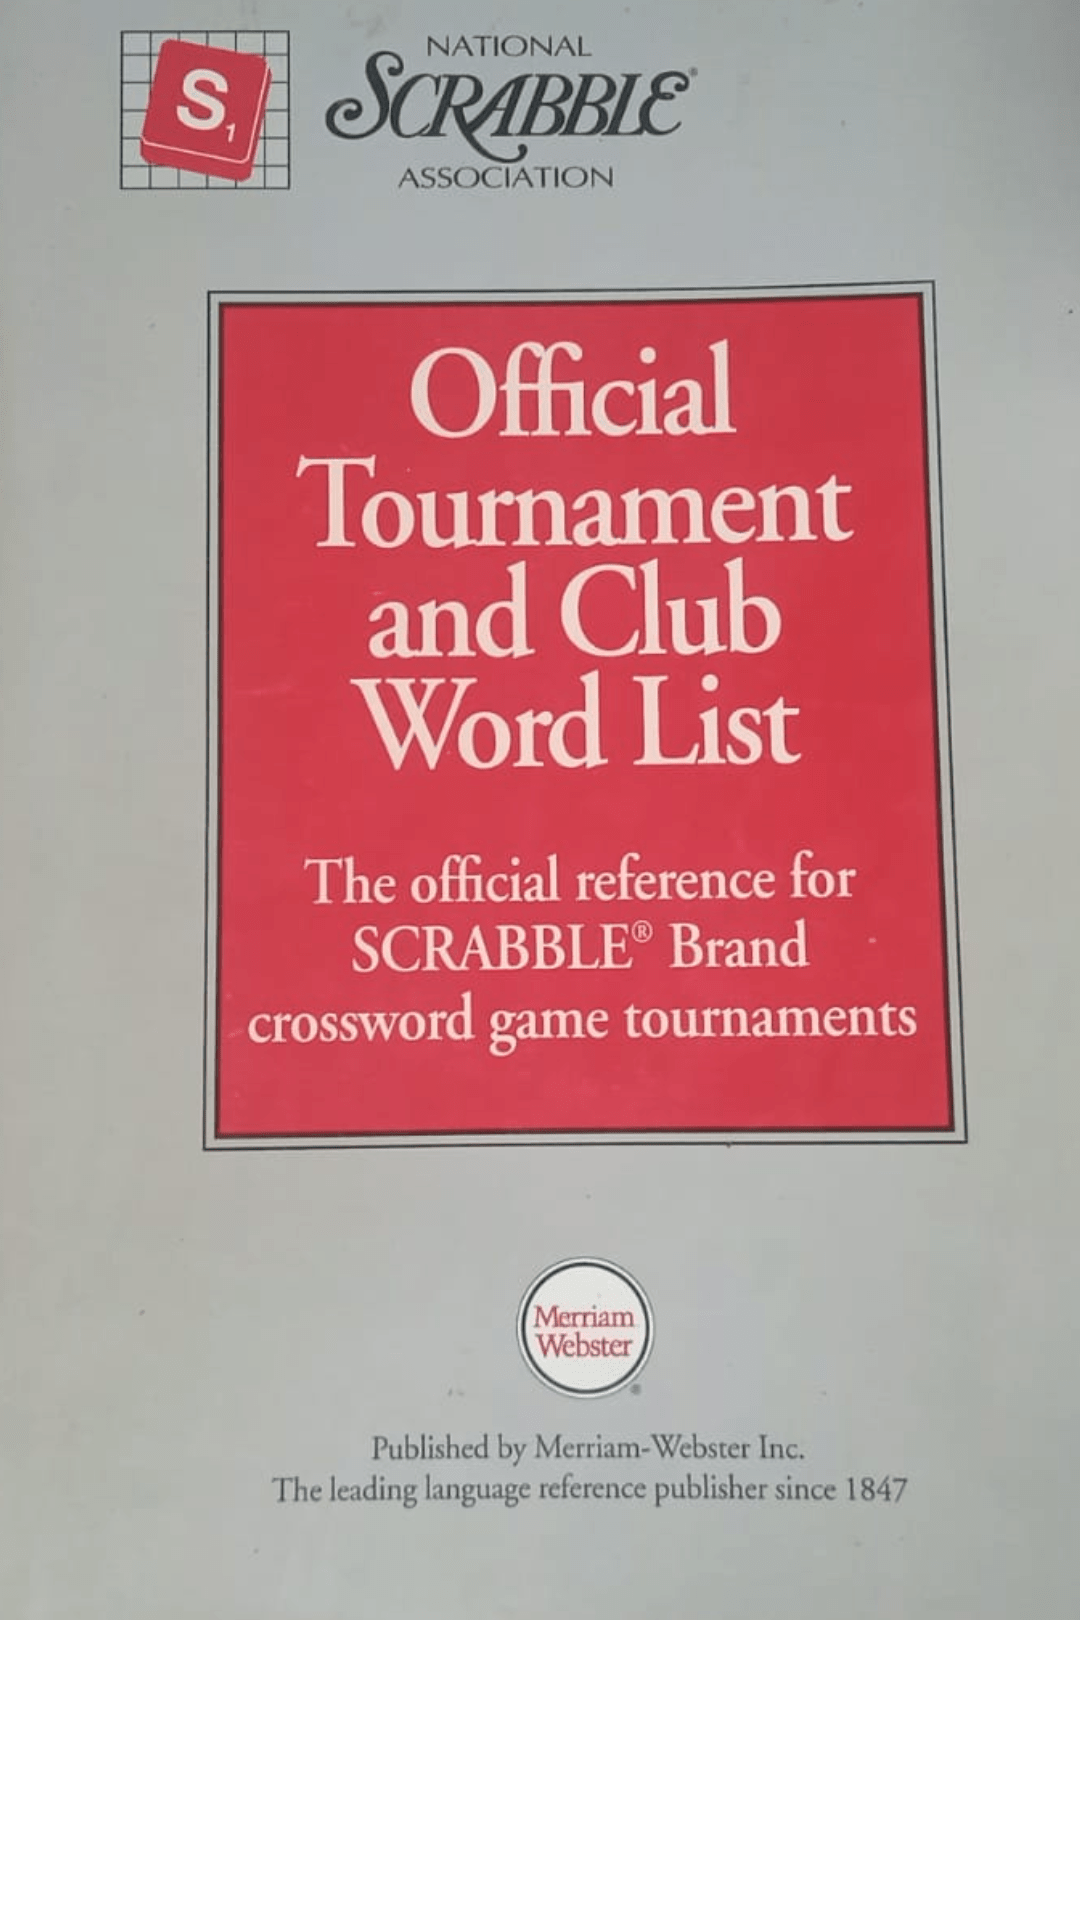 National Scrabble Association Official Tournament and Club Word List